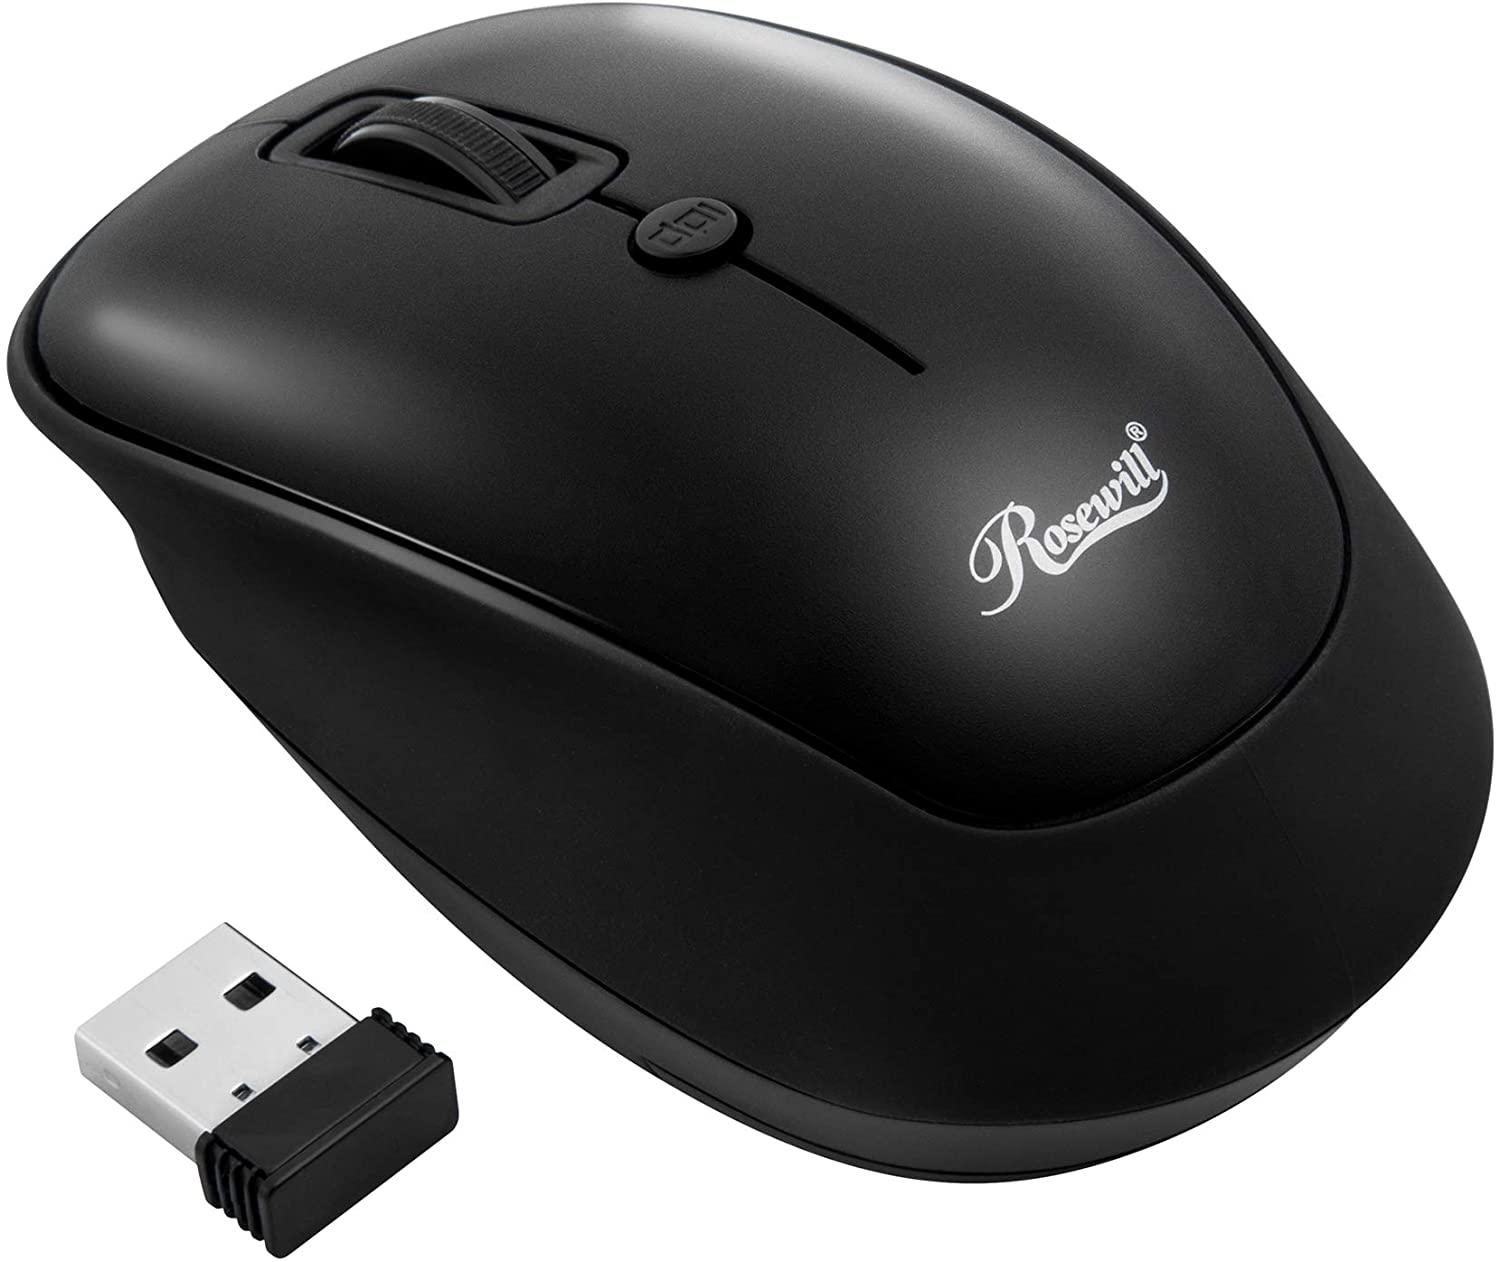 Rosewill Wireless Compact Optical Computer Mouse for $5.60